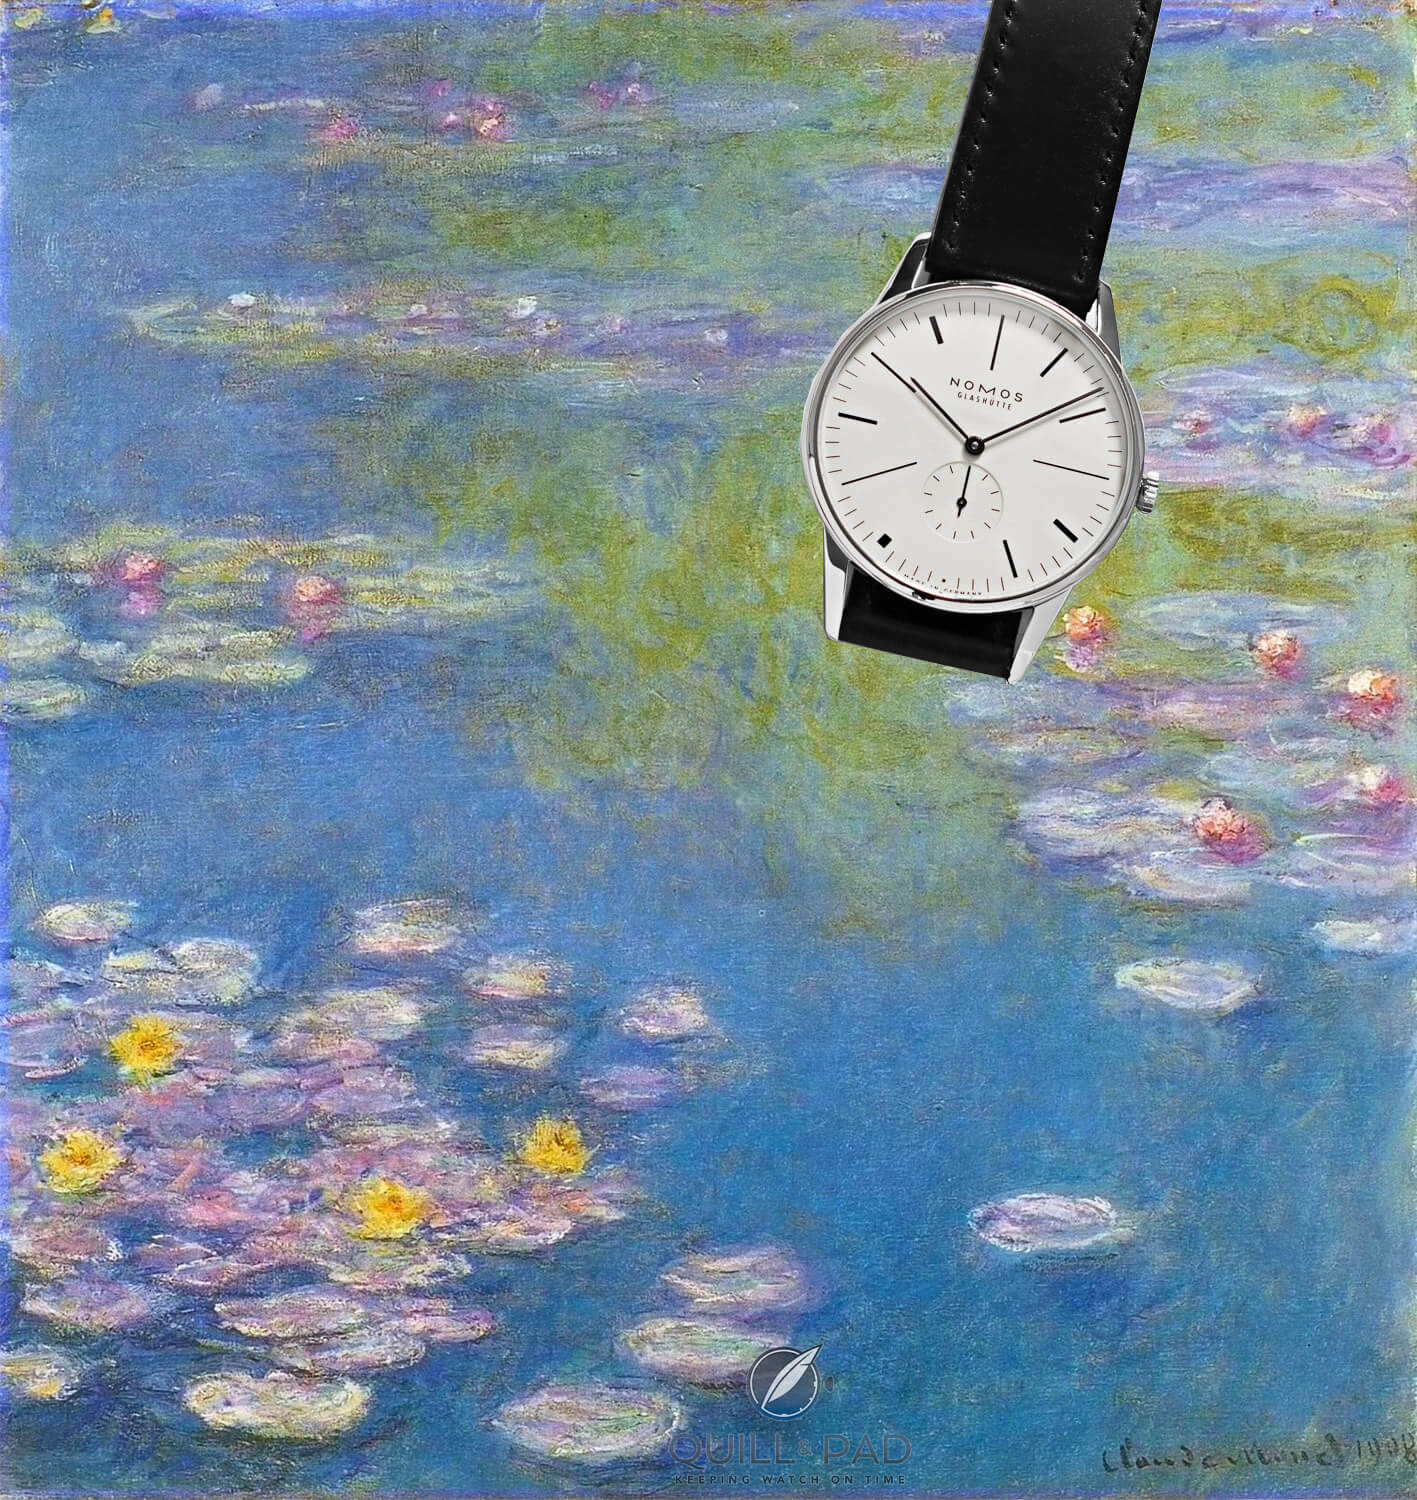 Monet's pascal colors risked making the Nomos Monet Water Lillies limited edition a passing fancy so a more monochromatic tribute was used for this eye-catching homage